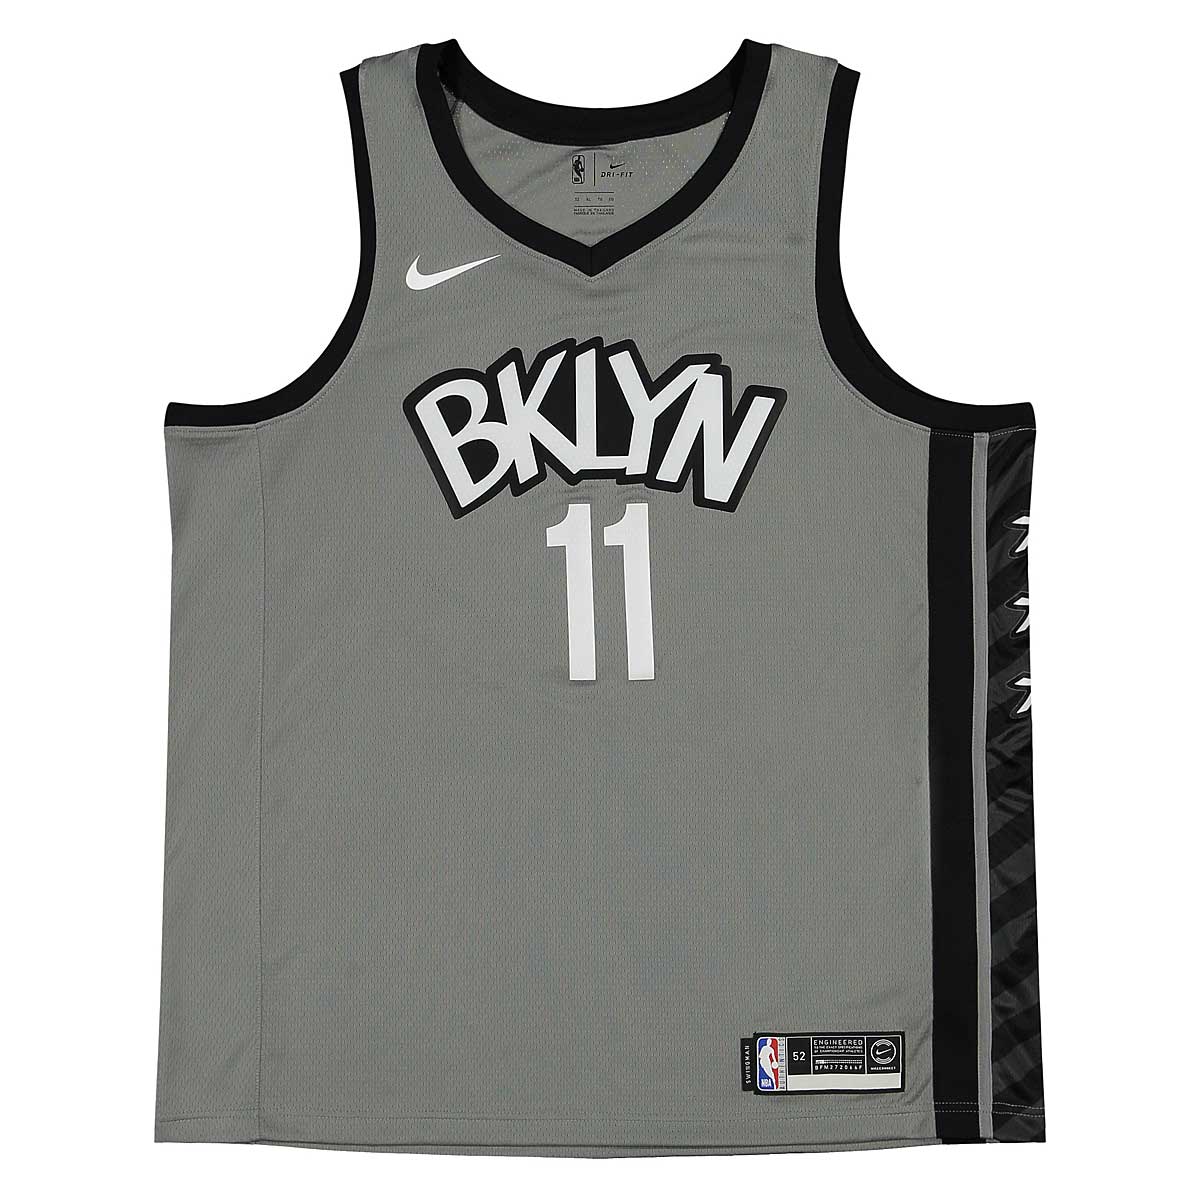 Throwback Store - “BKLYN” WE GO HARD. Kyrie Irving Brooklyn Nets Statement  Edition Swingman Jersey now available.